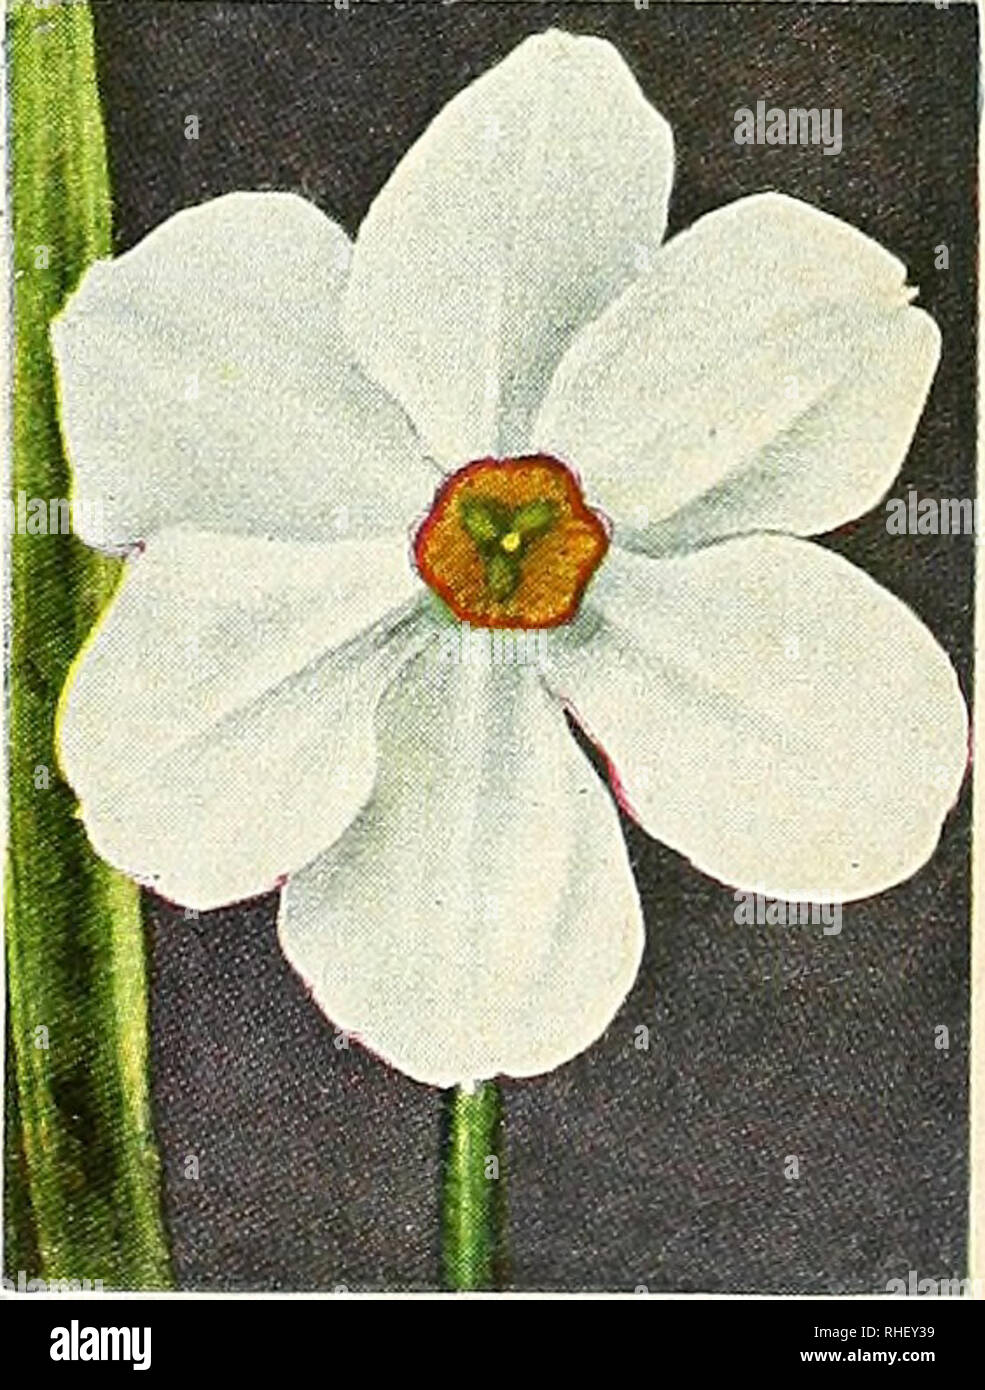 . Bolgiano's fall 1967. Nurseries (Horticulture) Catalogs; Bulbs (Plants) Catalogs; Seeds Catalogs; Trees Catalogs. KING ALFRED LARGE CUPPED DAFFODILS, continued Large Cupped Daffodils Aranjuez. Light yellow perianth with large cup edged red. Exceptionally fine form. (M) 3 for 55c.; $2.05 per doz.; $16.00 per 100. Better Times. Very smooth, large, golden yellow perianth; enormous yellow cup with a broad band of deep orange. Very early. 3 for 75c.; $2.85 per doz.; $22.50 per 100. Fortune's Bowl. A beautiful golden yellow peri- anth with a deep orange, bowl-shaped cup. Finest of the Fortune seed Stock Photo